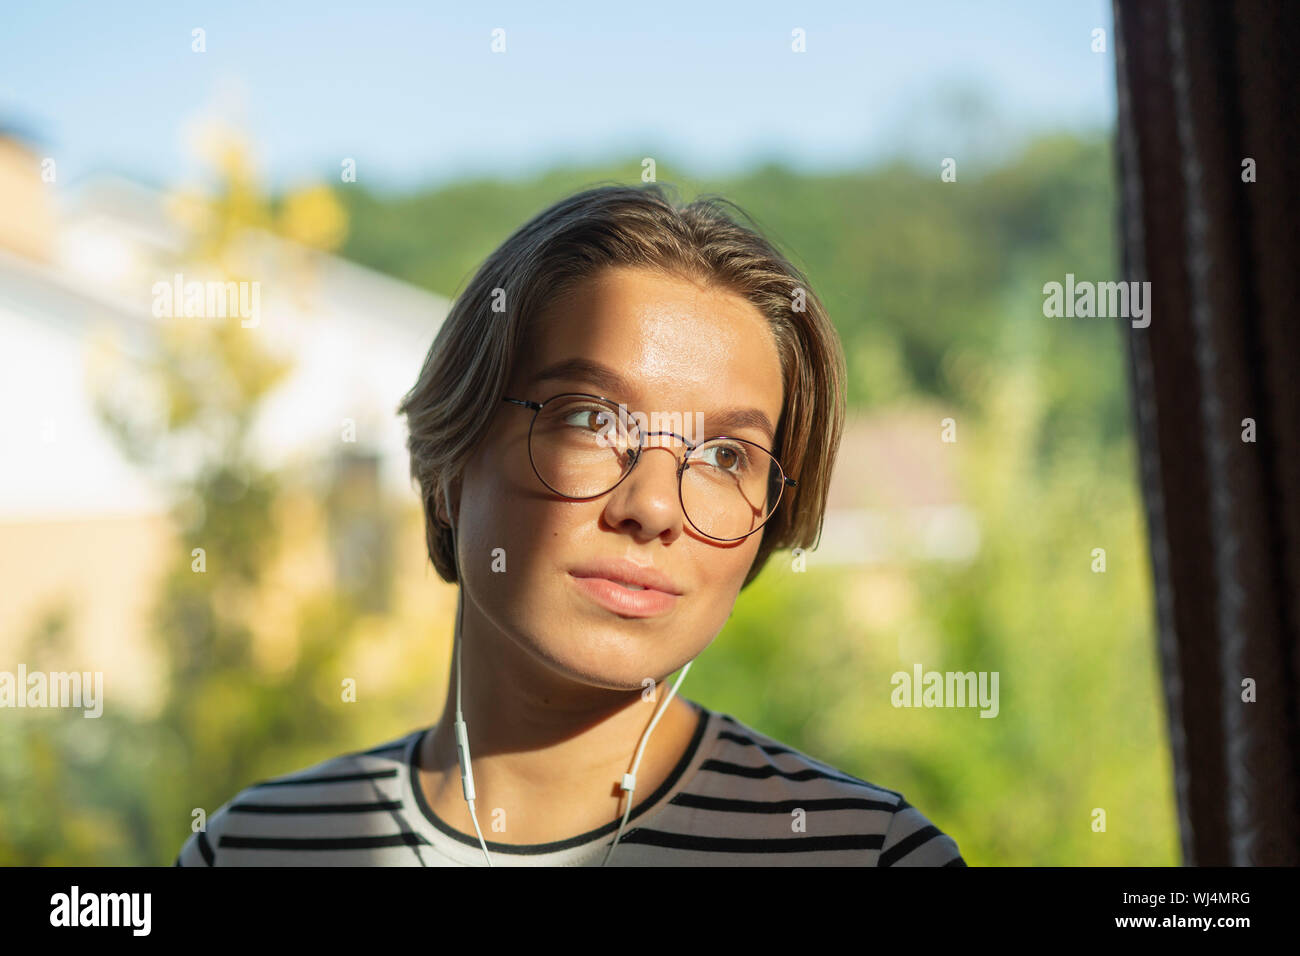 Young woman listening to music with headphones Stock Photo